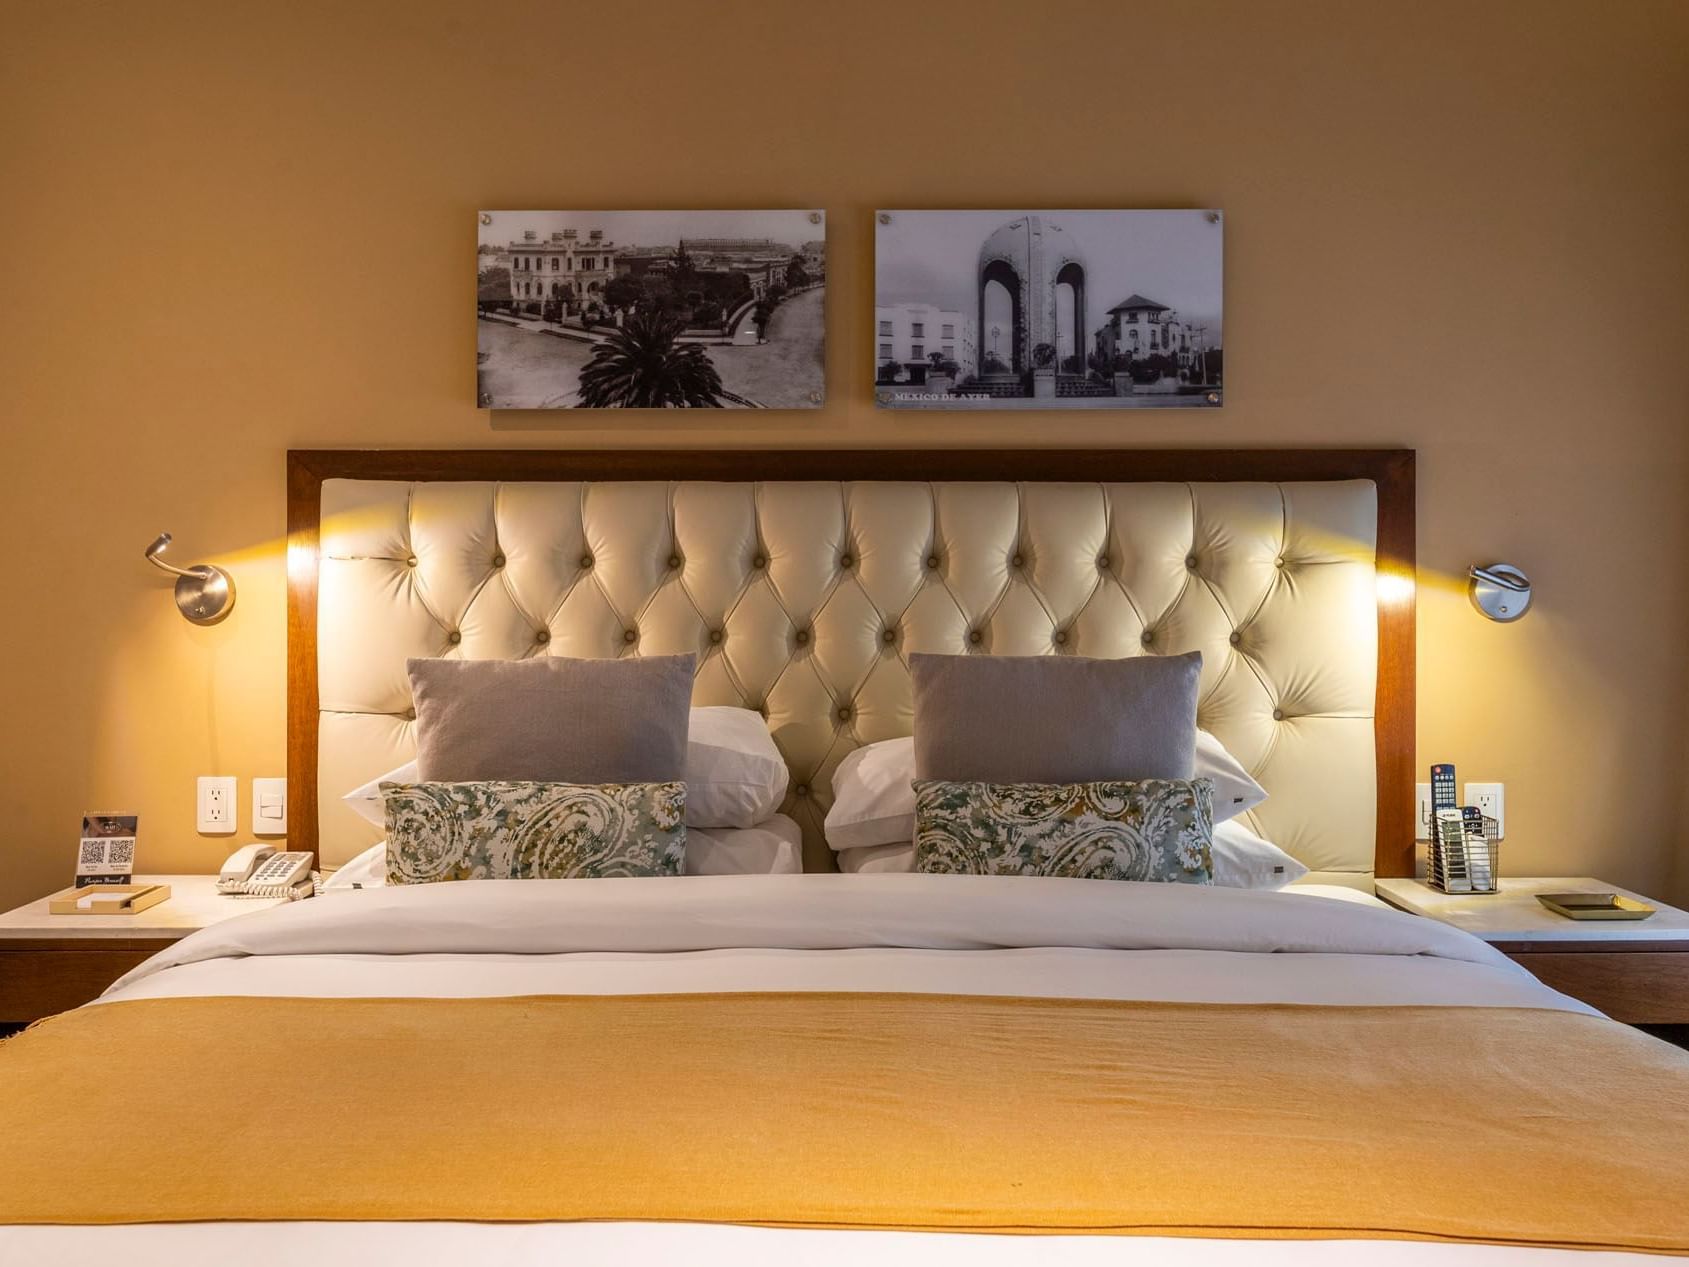 King bed & nightstands in Junior Suite at Casa Mali by Dominion